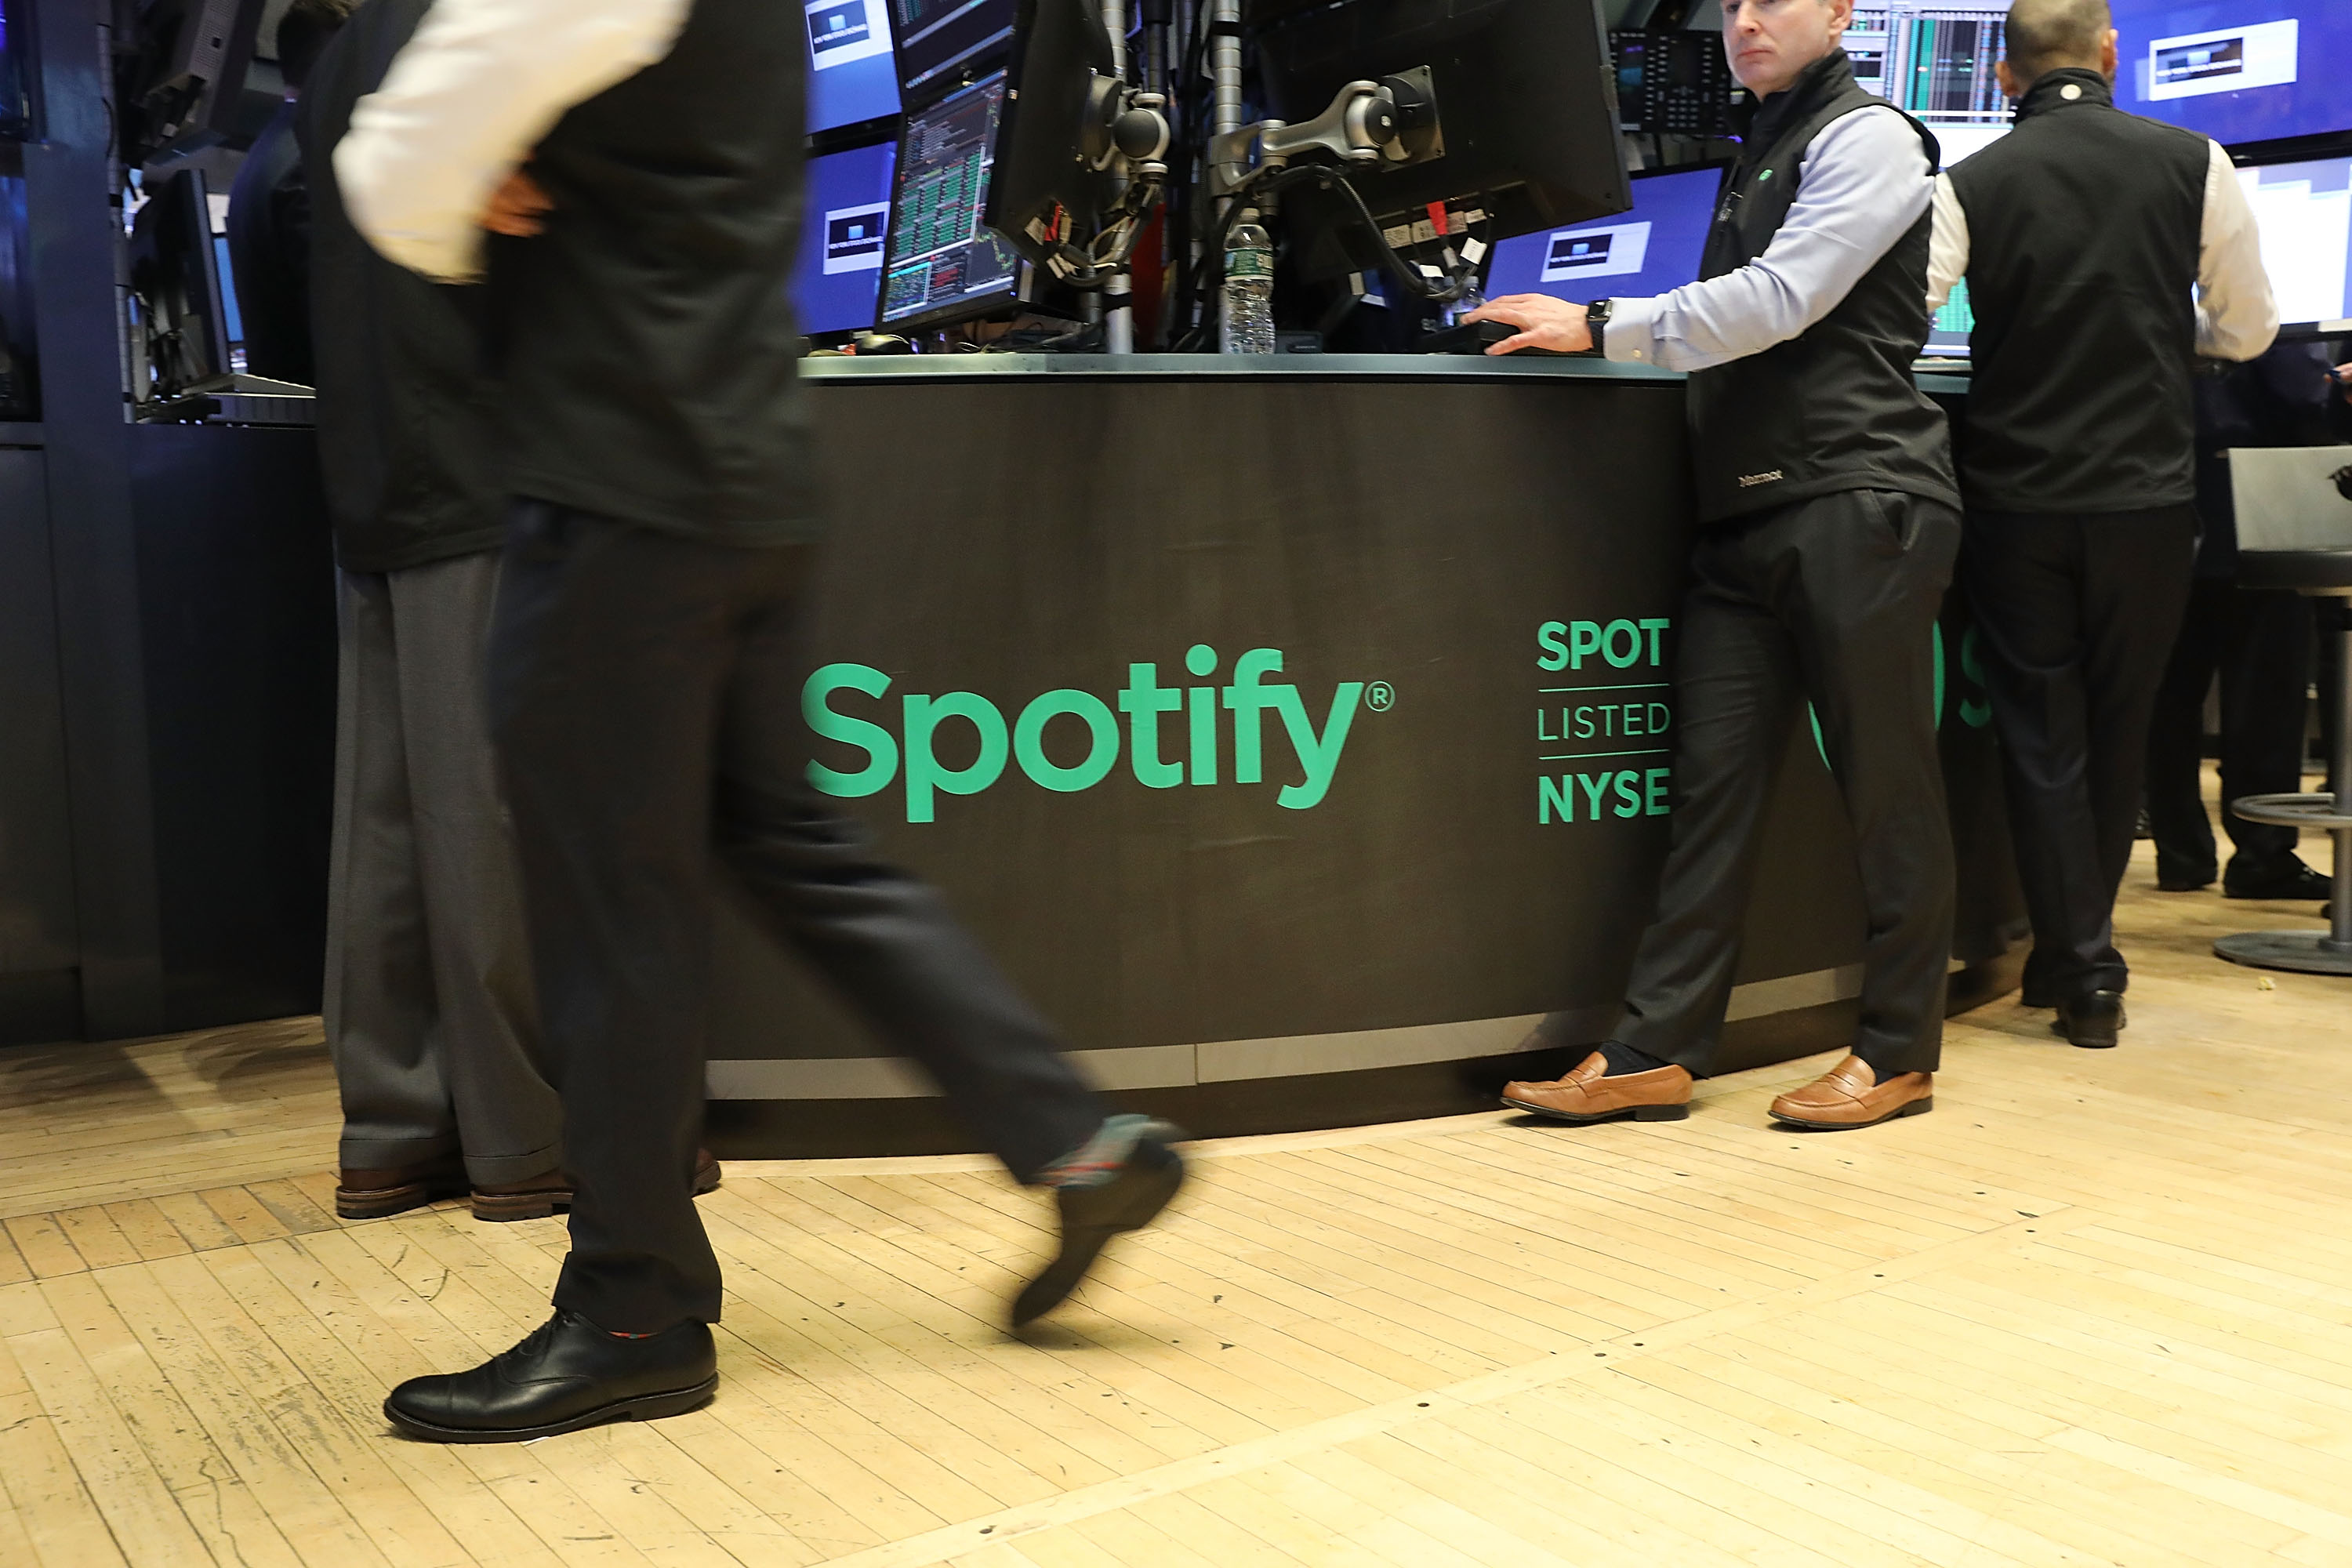 Music streaming service Spotify going public on the New York Stock Exchange